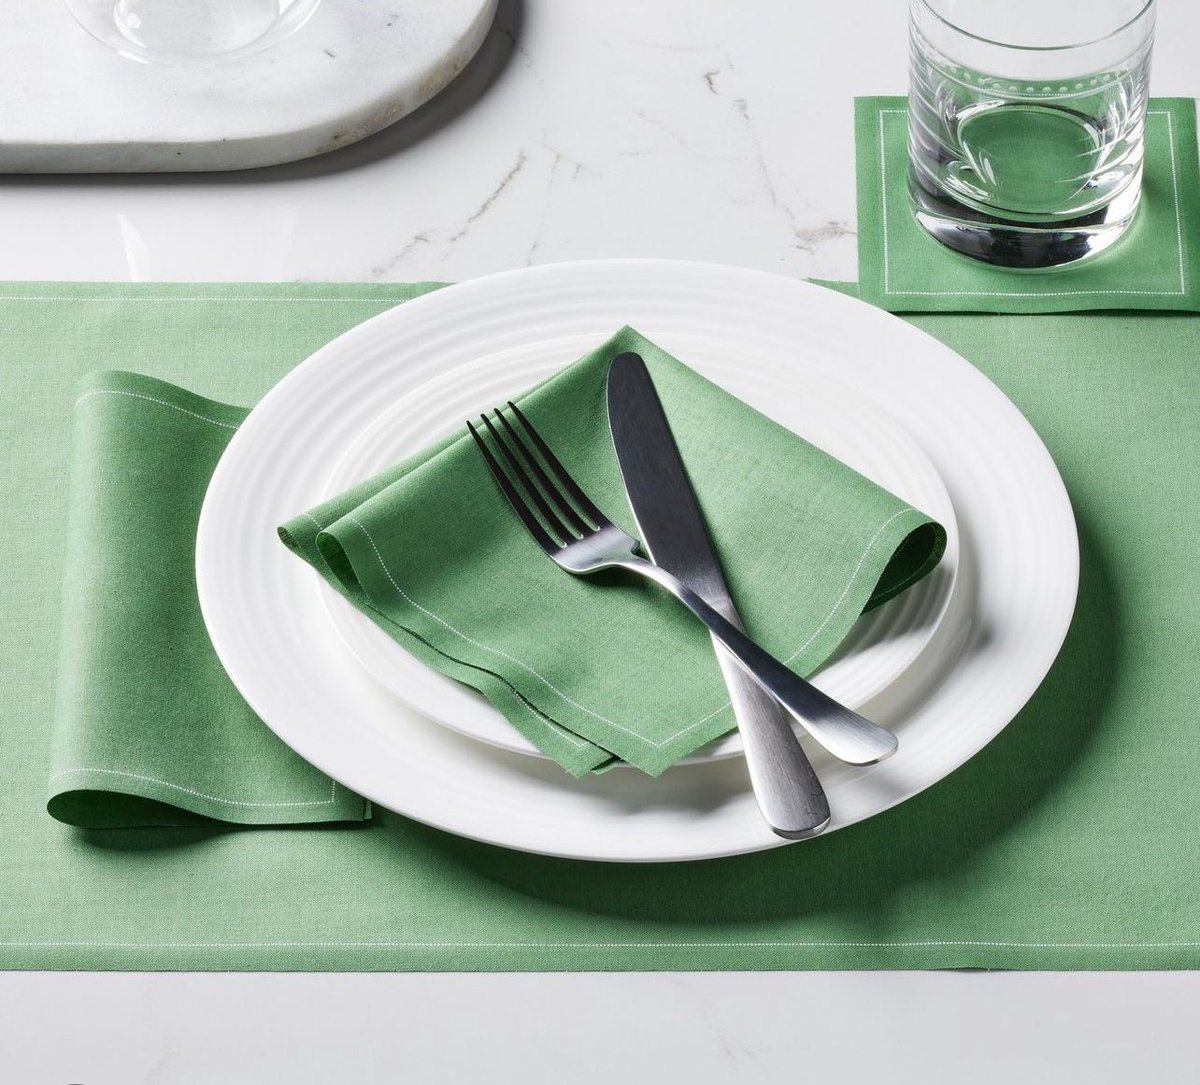 We Love the Luxurious Quality & Beauty of @mydrap_northamerica

#mydrapnorthamerica #tableaccents #partyideas #tablesetting #placemats #homedecor #hospitalityideas #bestnapkins
#nyccommercialkitchen #nycsharedcommercialkitchen #nyckitchenrental #nycrentalkitchen #eterrakitchen